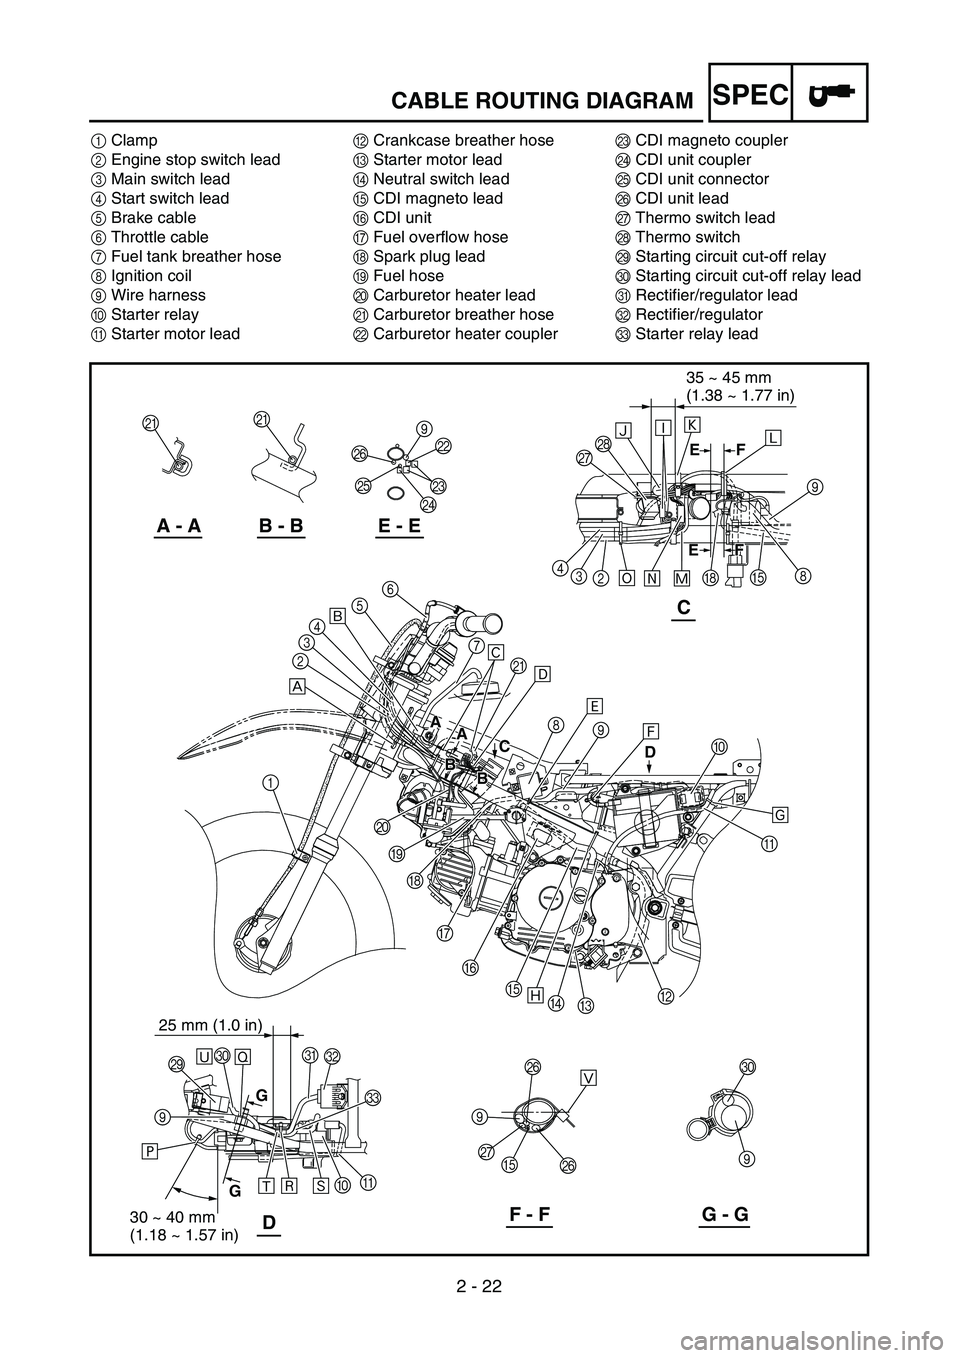 YAMAHA TTR90 2004  Owners Manual 2 - 22
SPECCABLE ROUTING DIAGRAM
1Clamp
2Engine stop switch lead
3Main switch lead
4Start switch lead
5Brake cable
6Throttle cable
7Fuel tank breather hose
8Ignition coil
9Wire harness
0Starter relay
